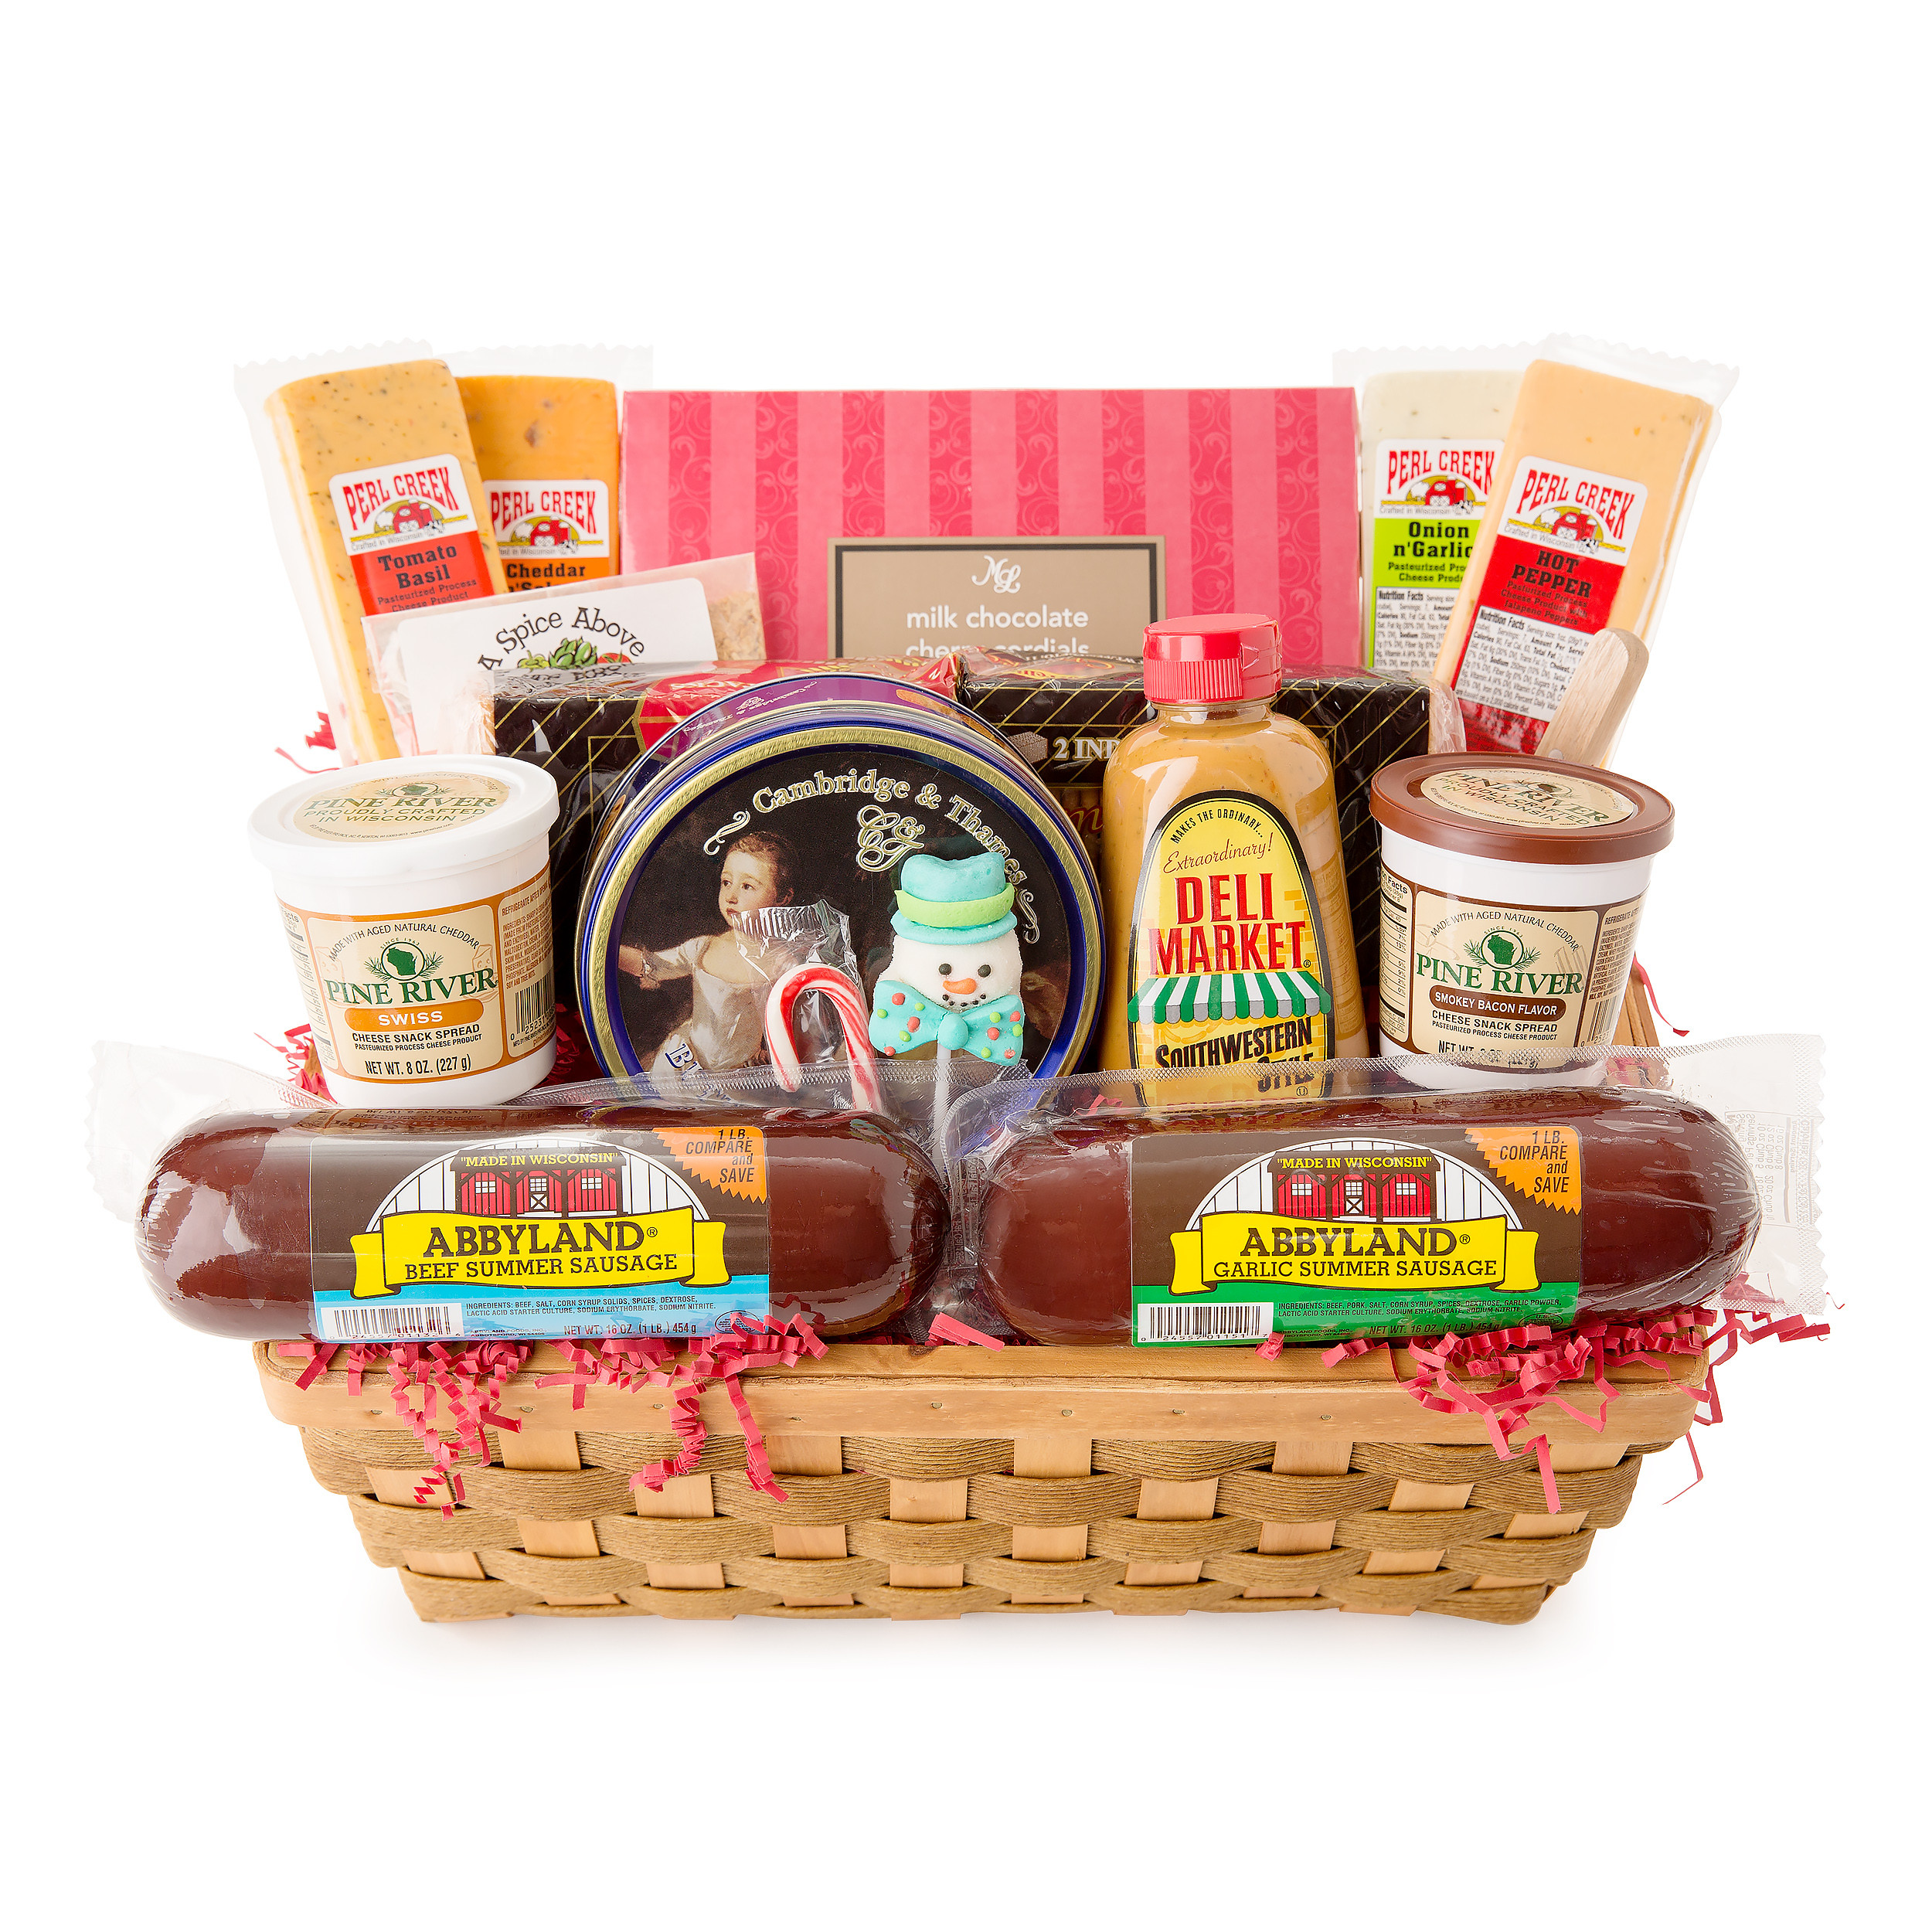 Summer Sausage And Cheese Gift Baskets
 Cheese Summer Sausage Gift Baskets Gift Ftempo